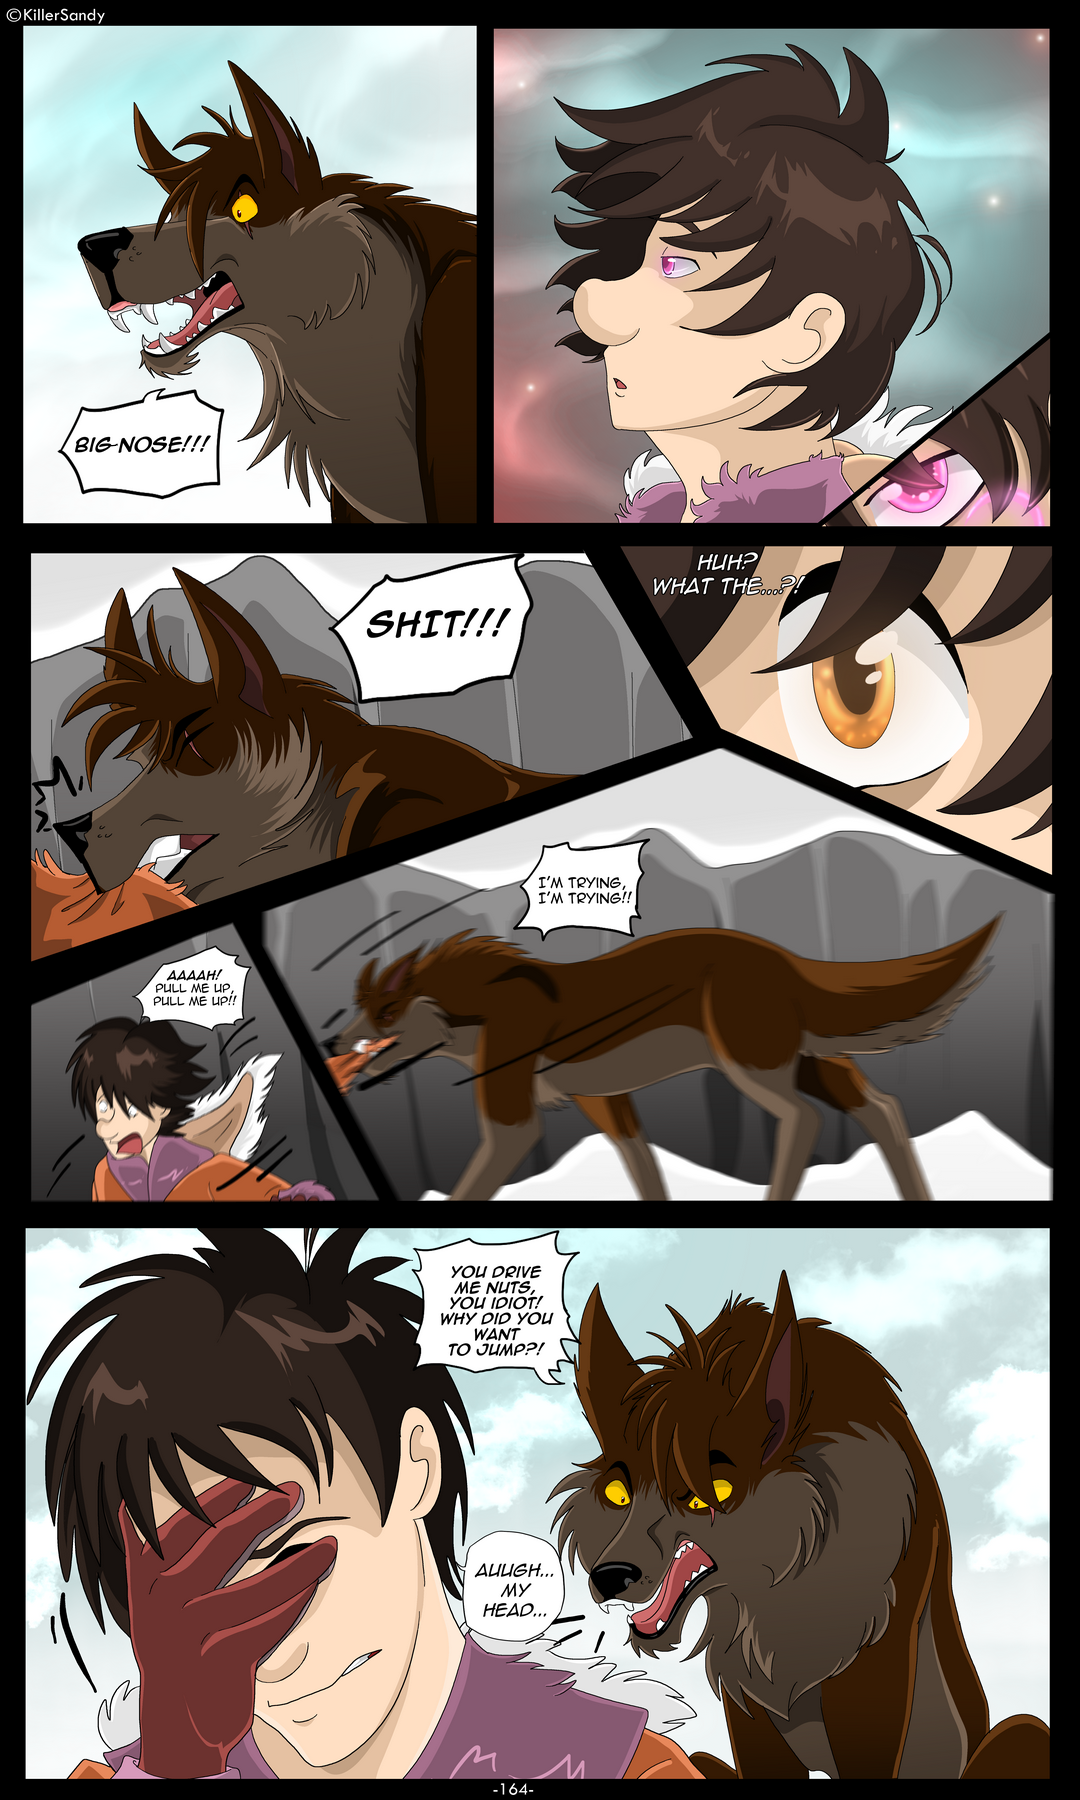 The Prince of the Moonlight Stone page 164